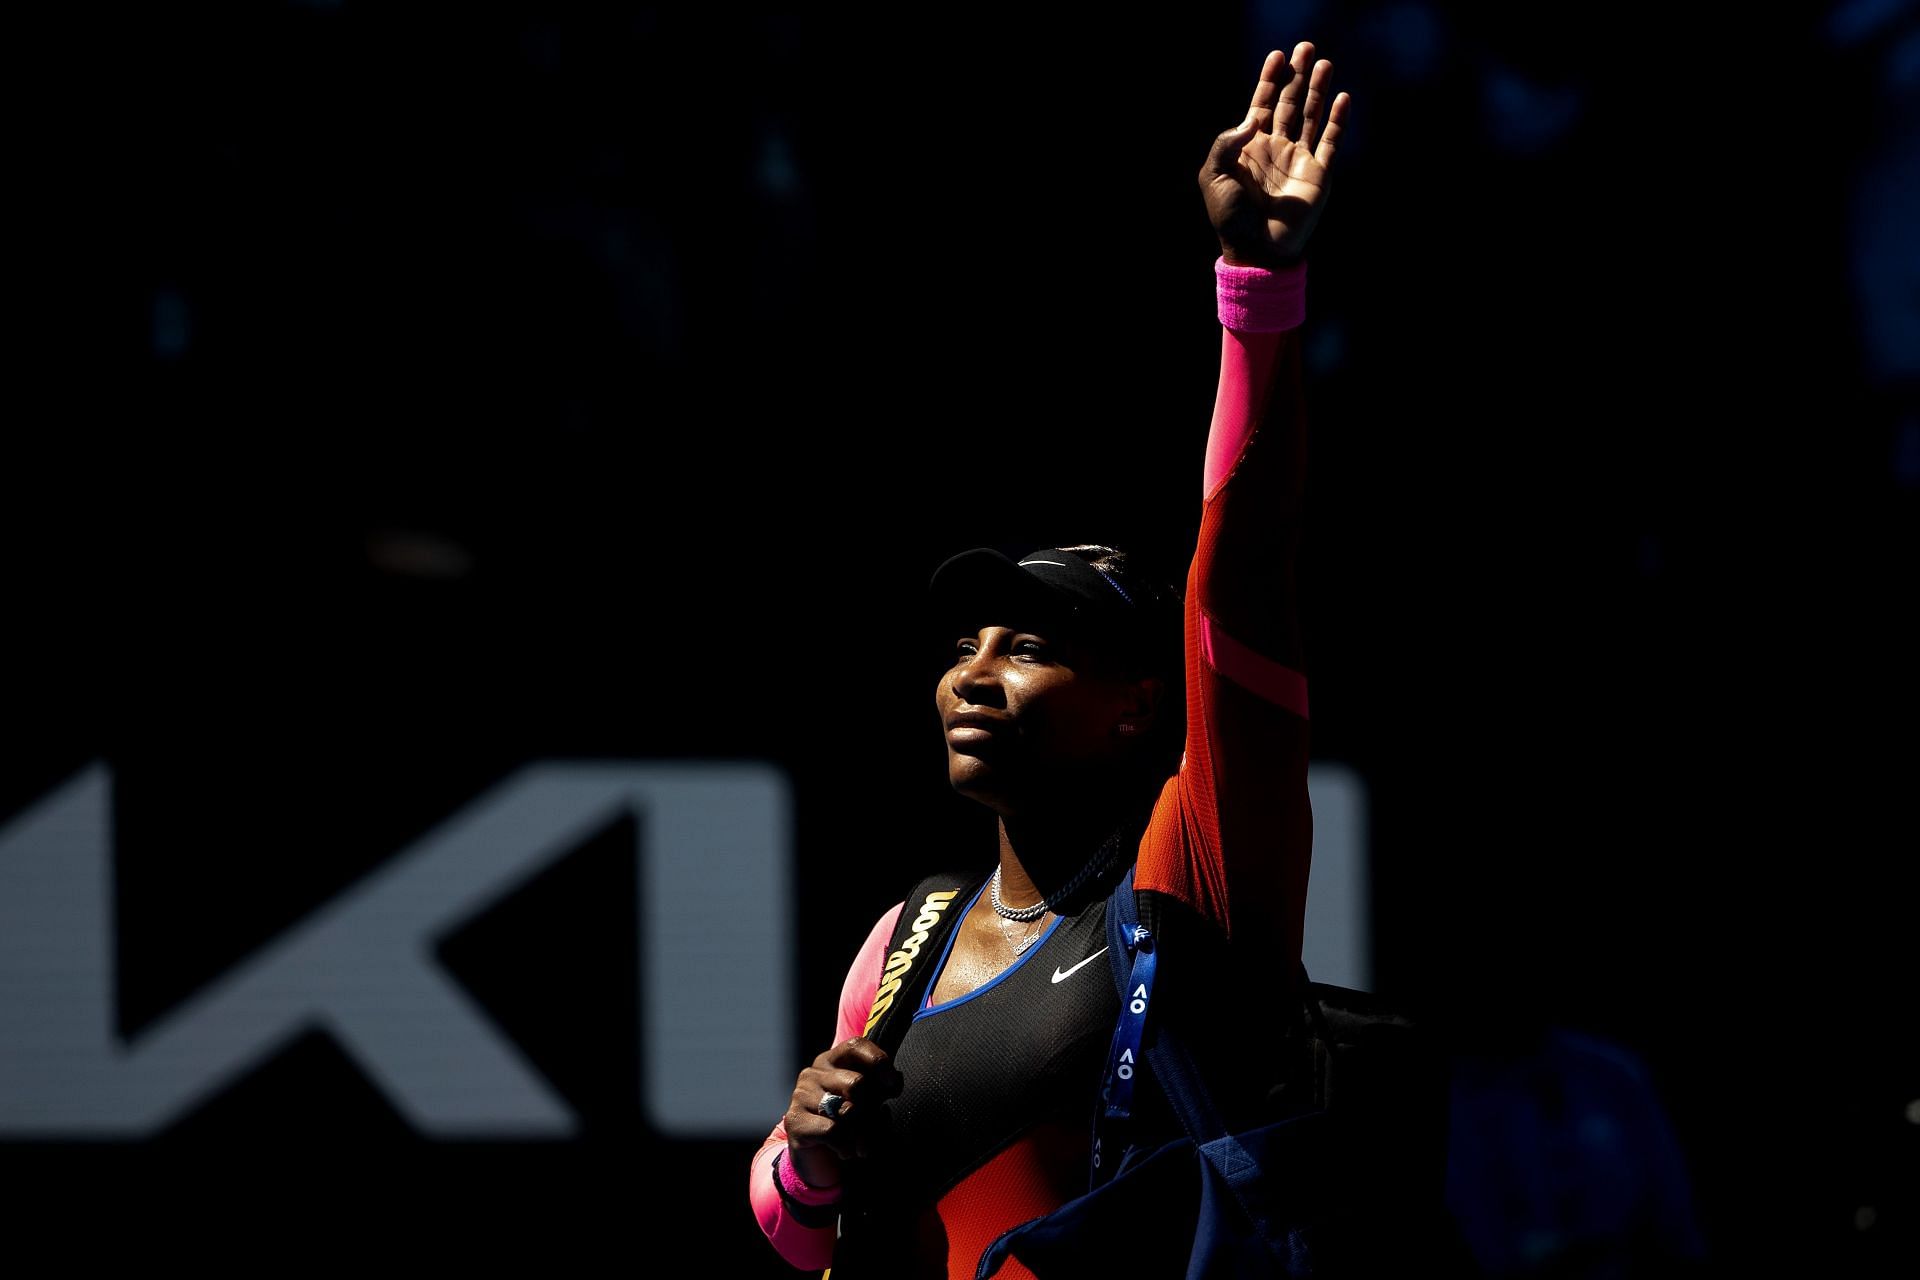 Serena Williams waves to the crowd after her semifinal defeat to Naomi Osaka at the 2021 Australian Open